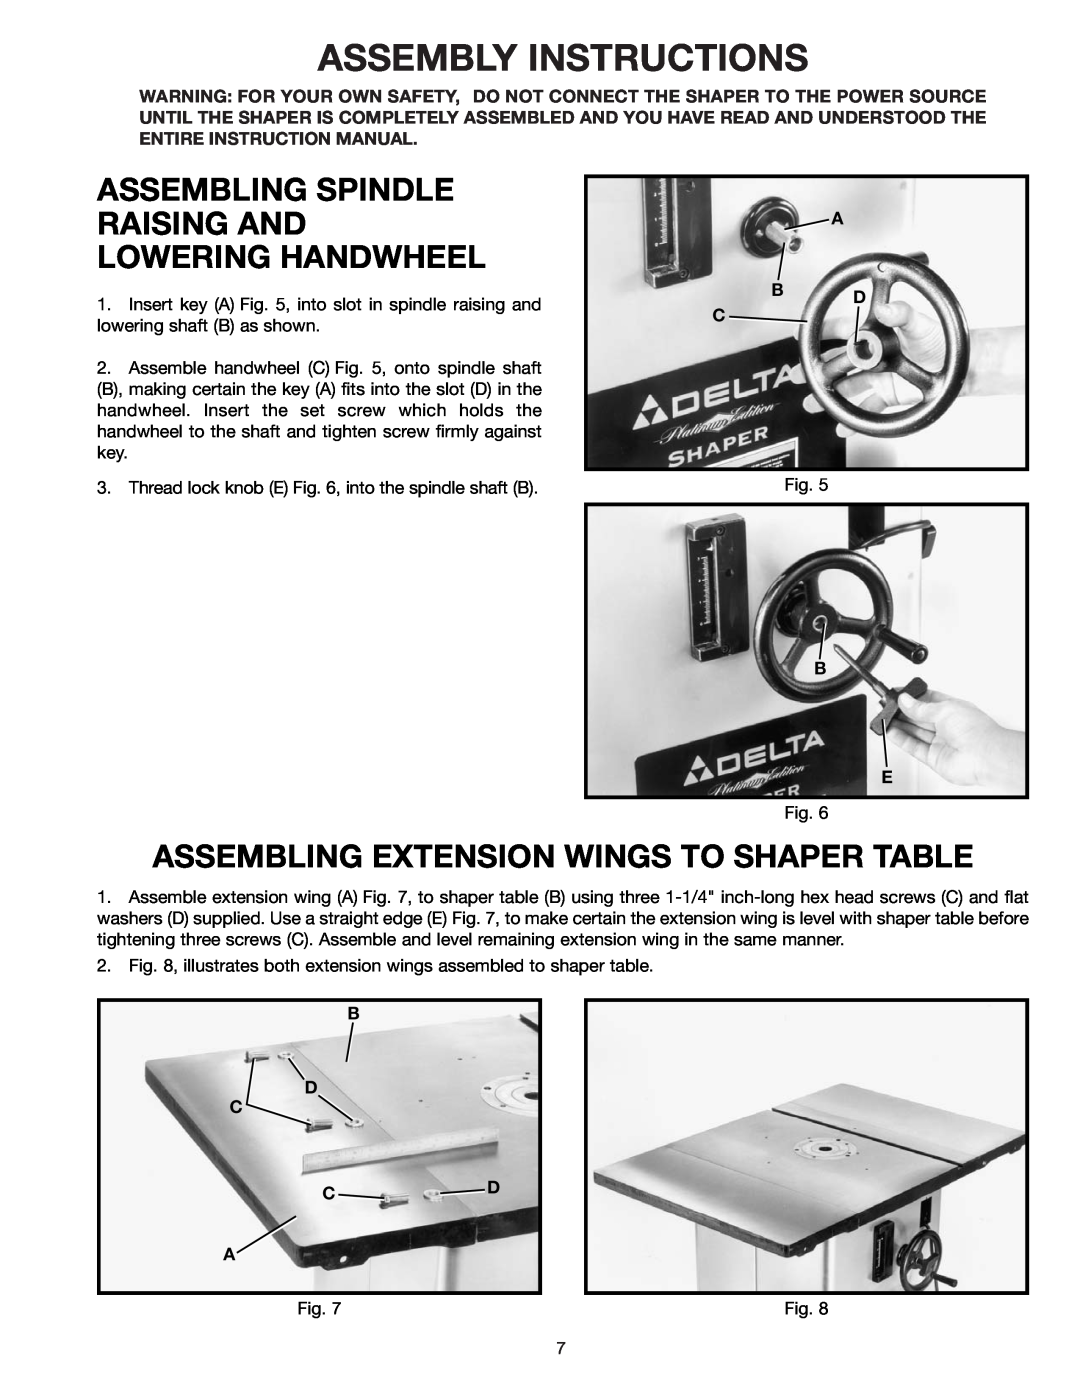 Delta 43-424 Assembly Instructions, Assembling Spindle Raising And Lowering Handwheel, A B D C, B D C C D A 